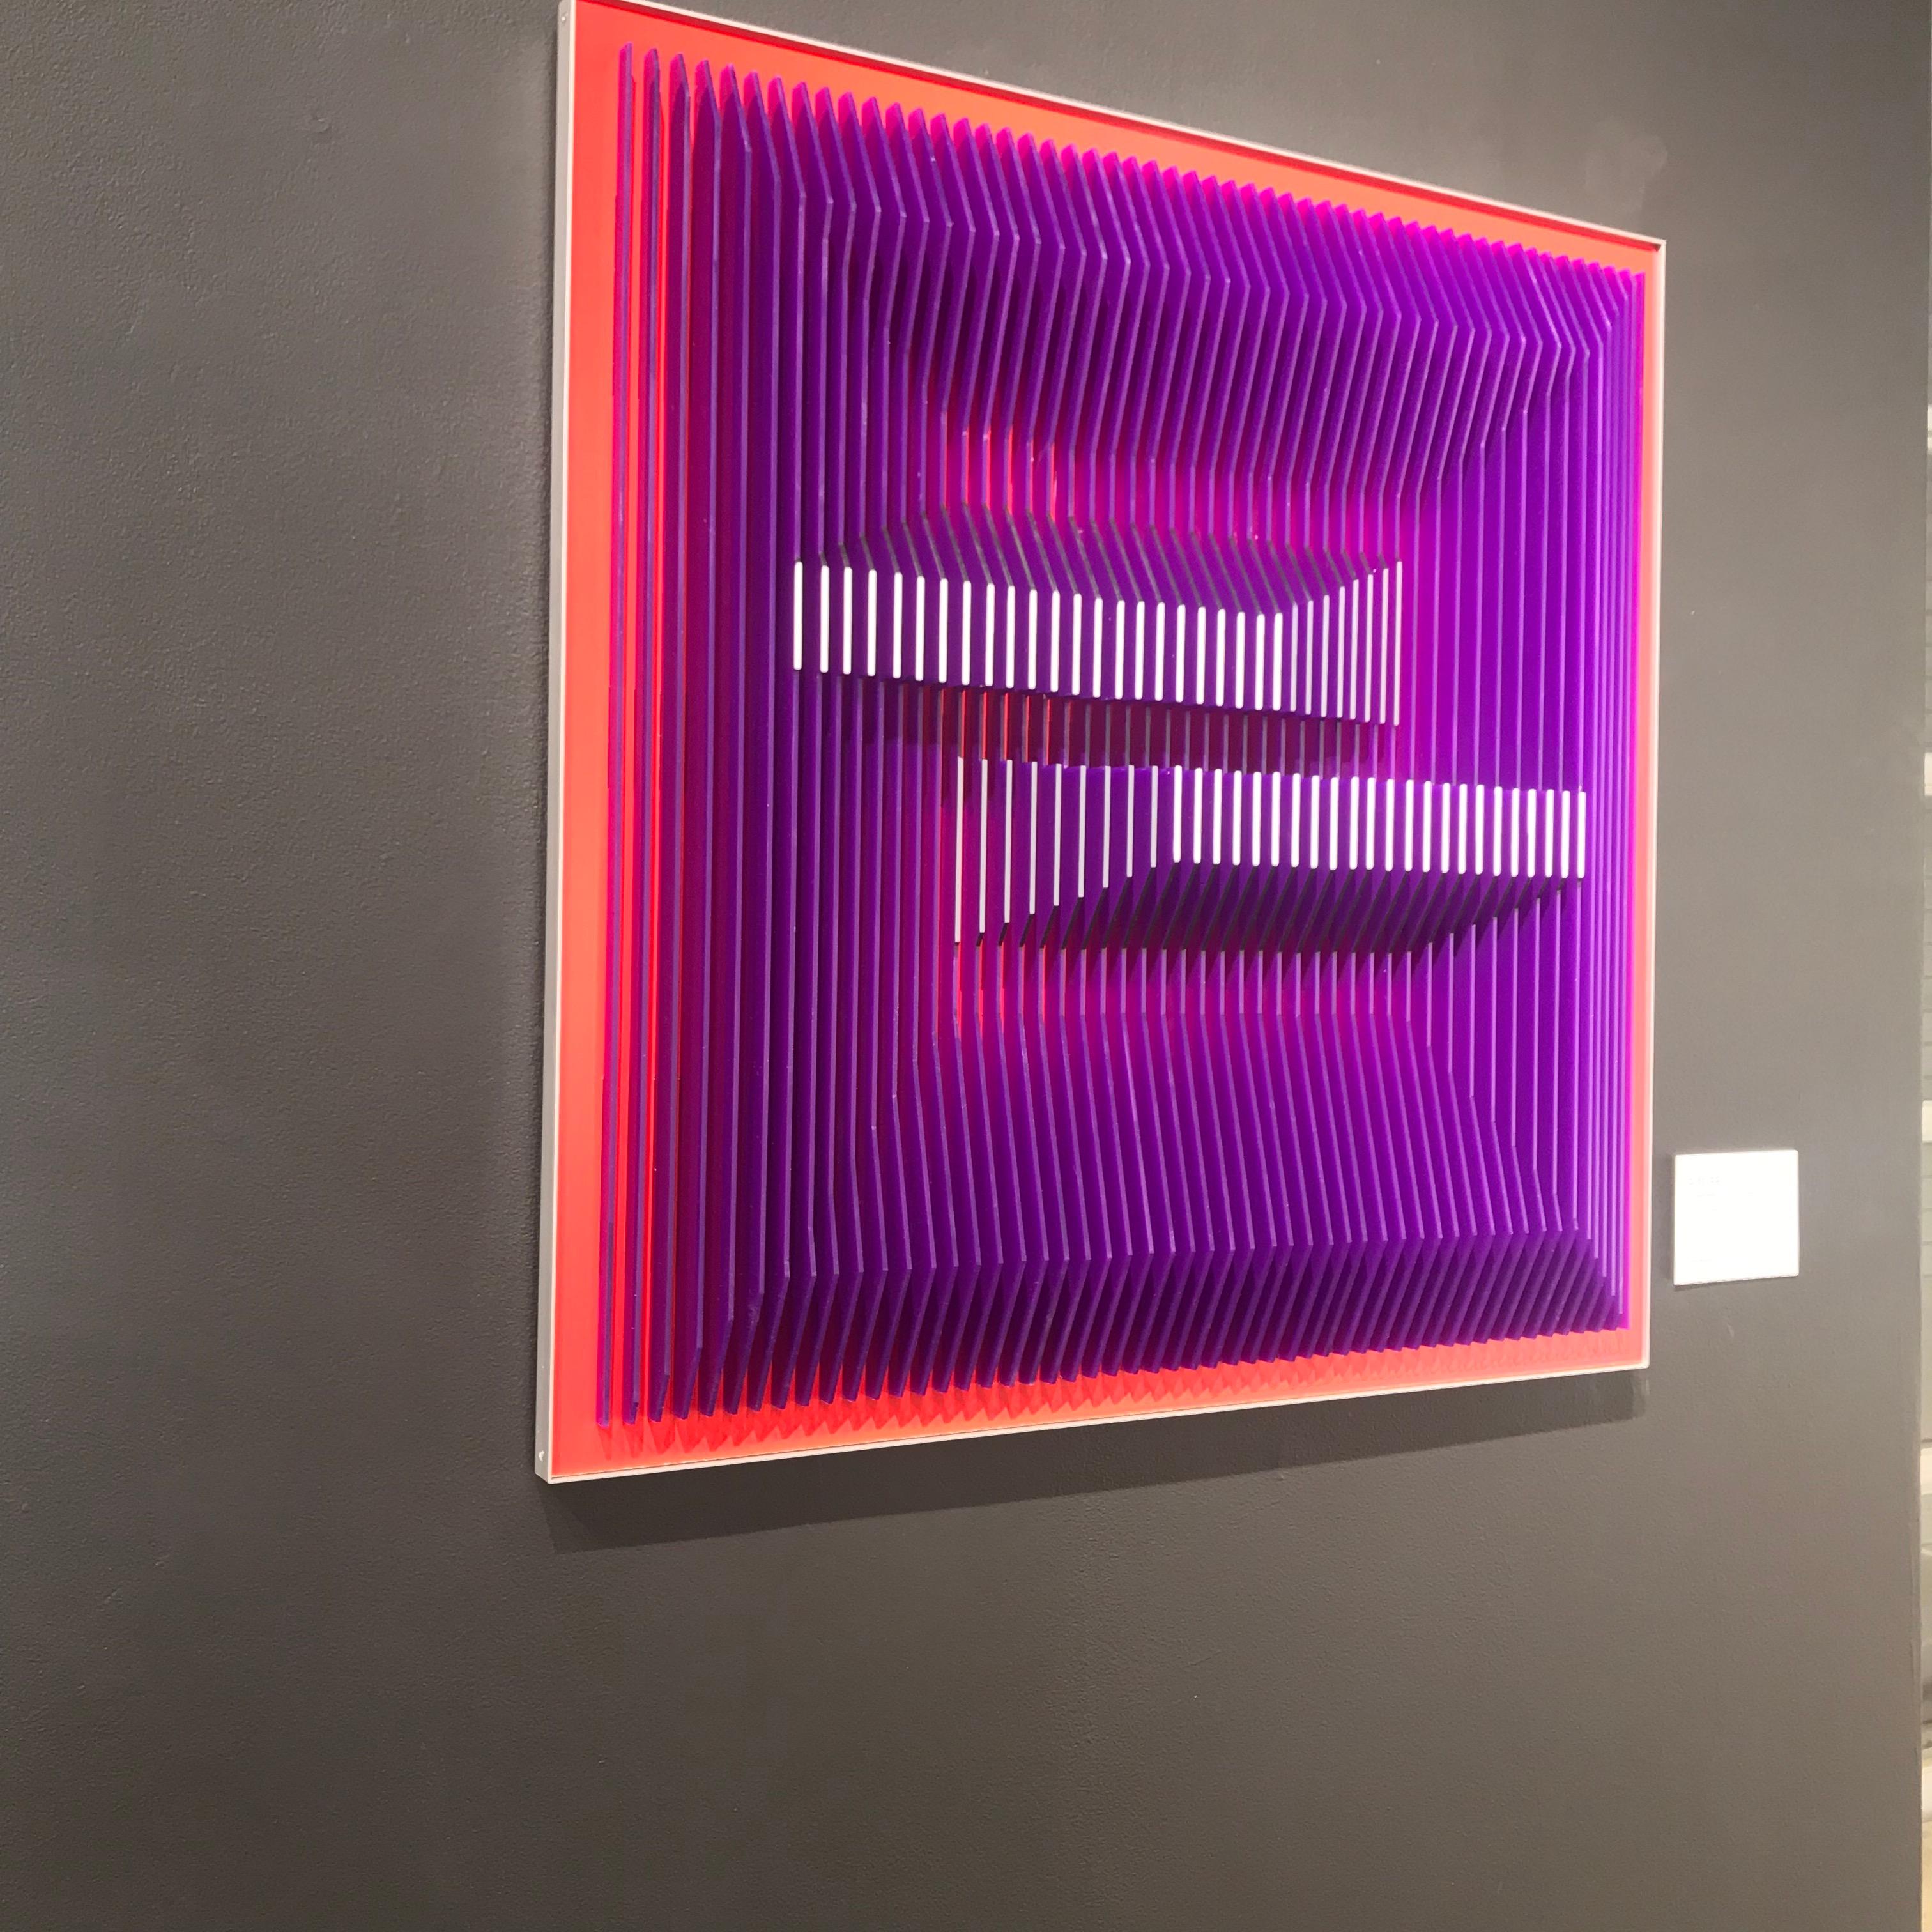 Displaced Illusion 30PR - Geometric Abstract wall sculpture by J. Margulis